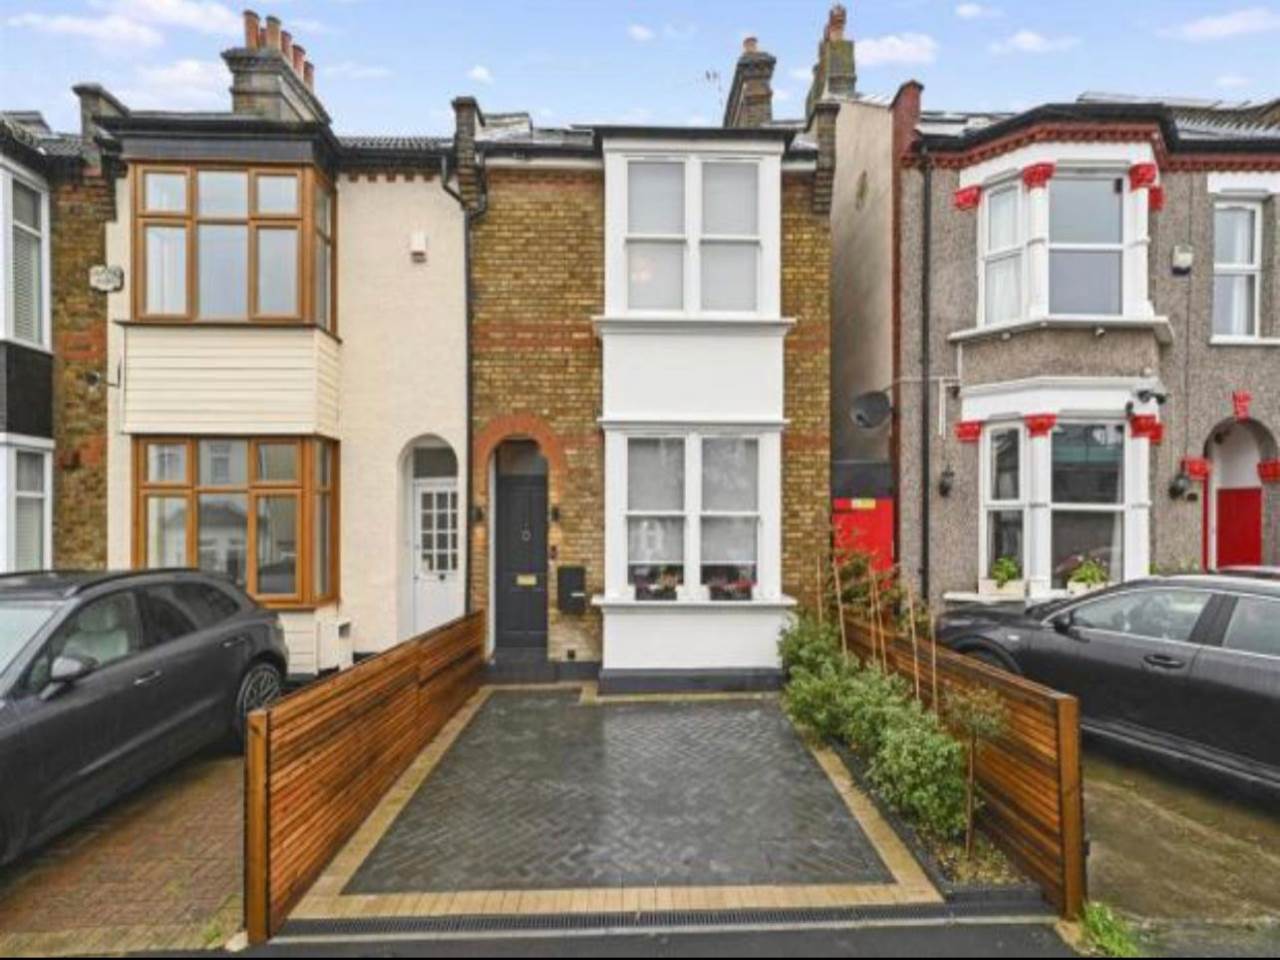 4 bed house to rent in Walpole Road, E18 